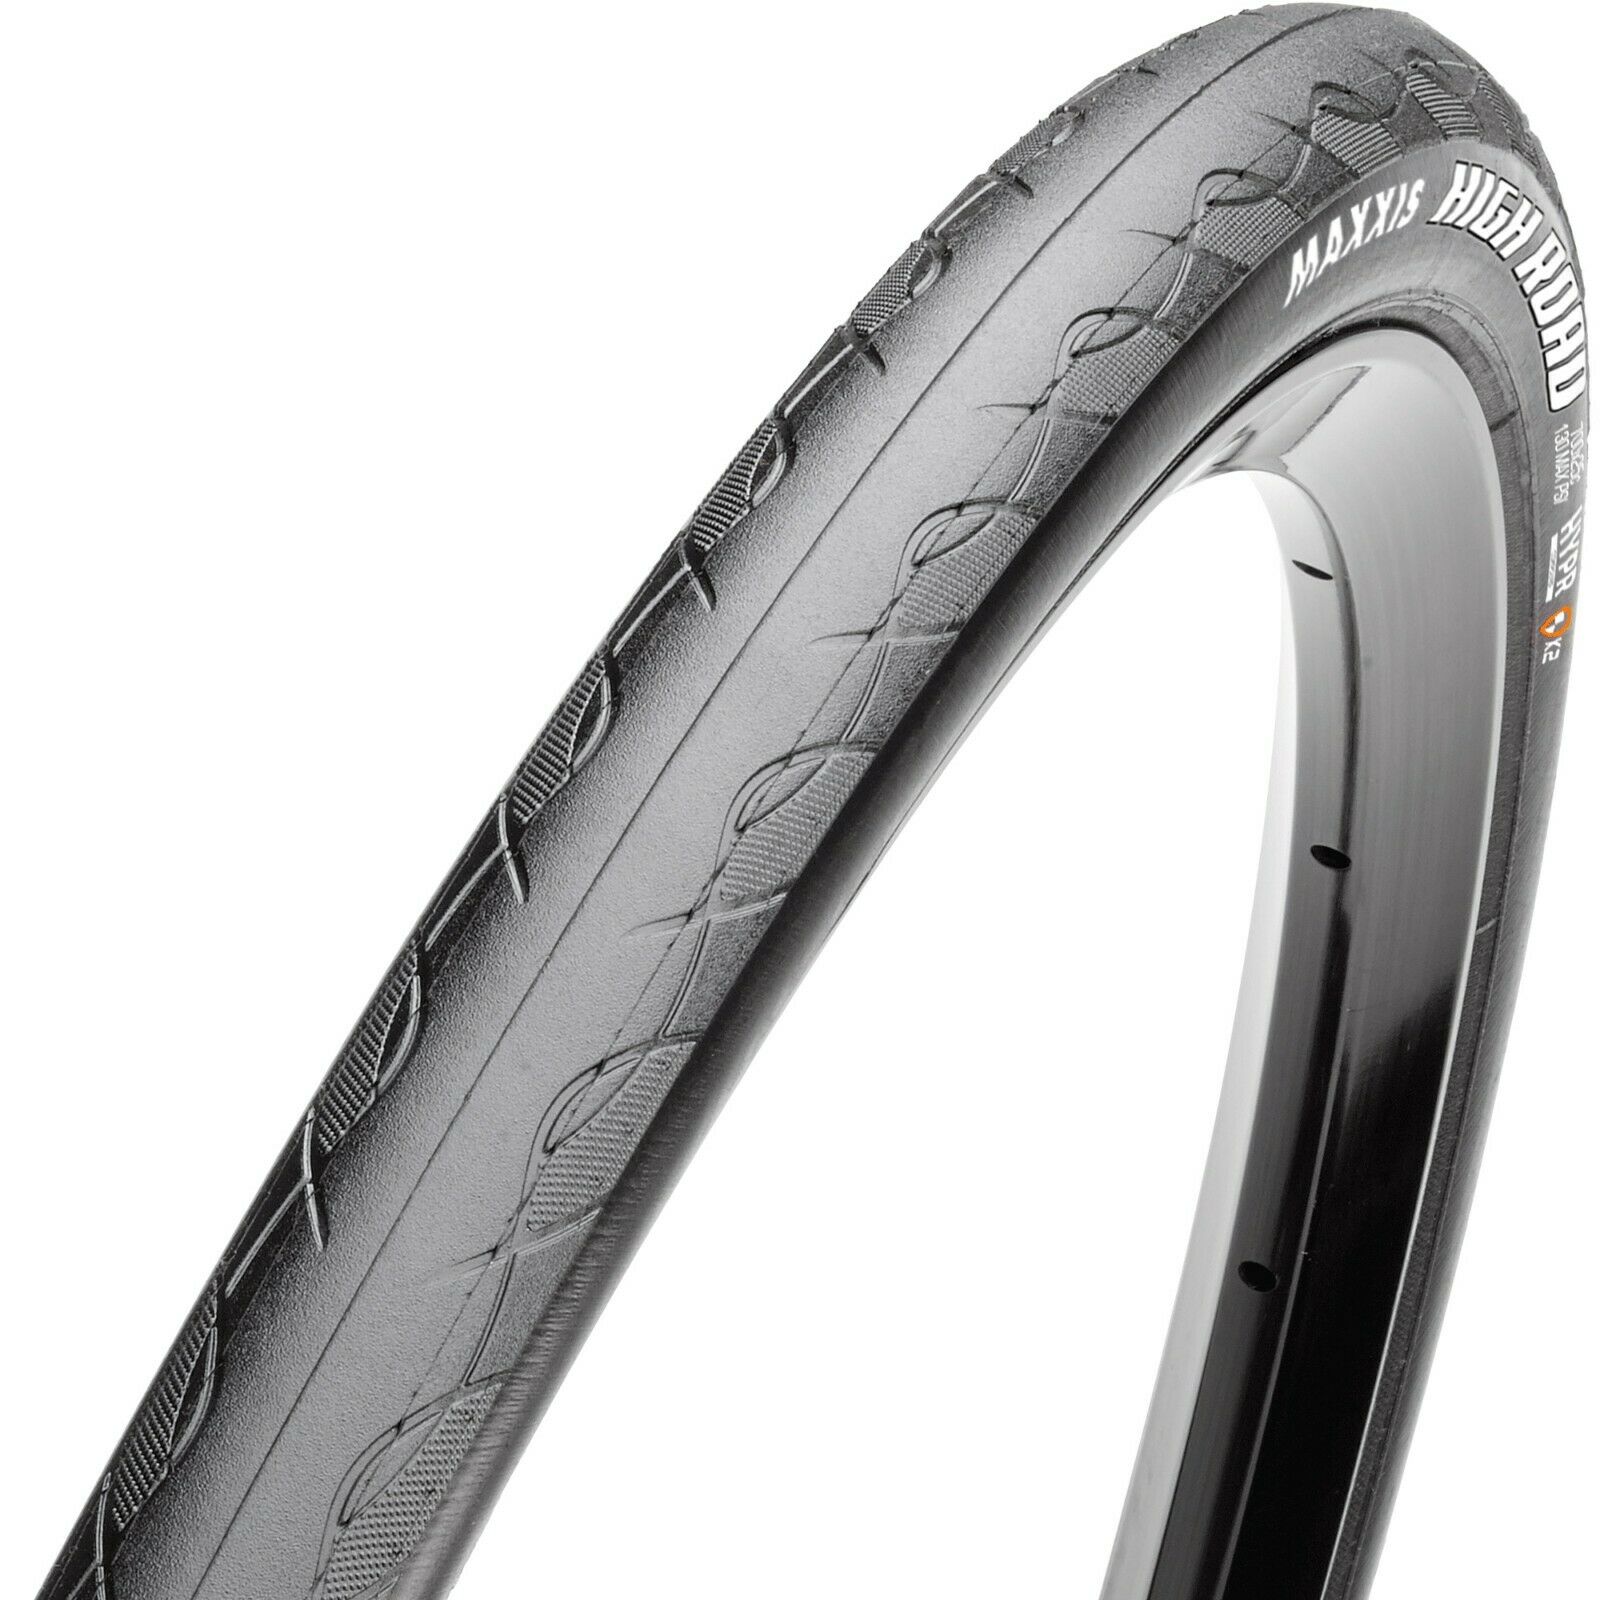 Maxxis High Road 700c Road Tyre - Sportandleisure.com (7104979271834)